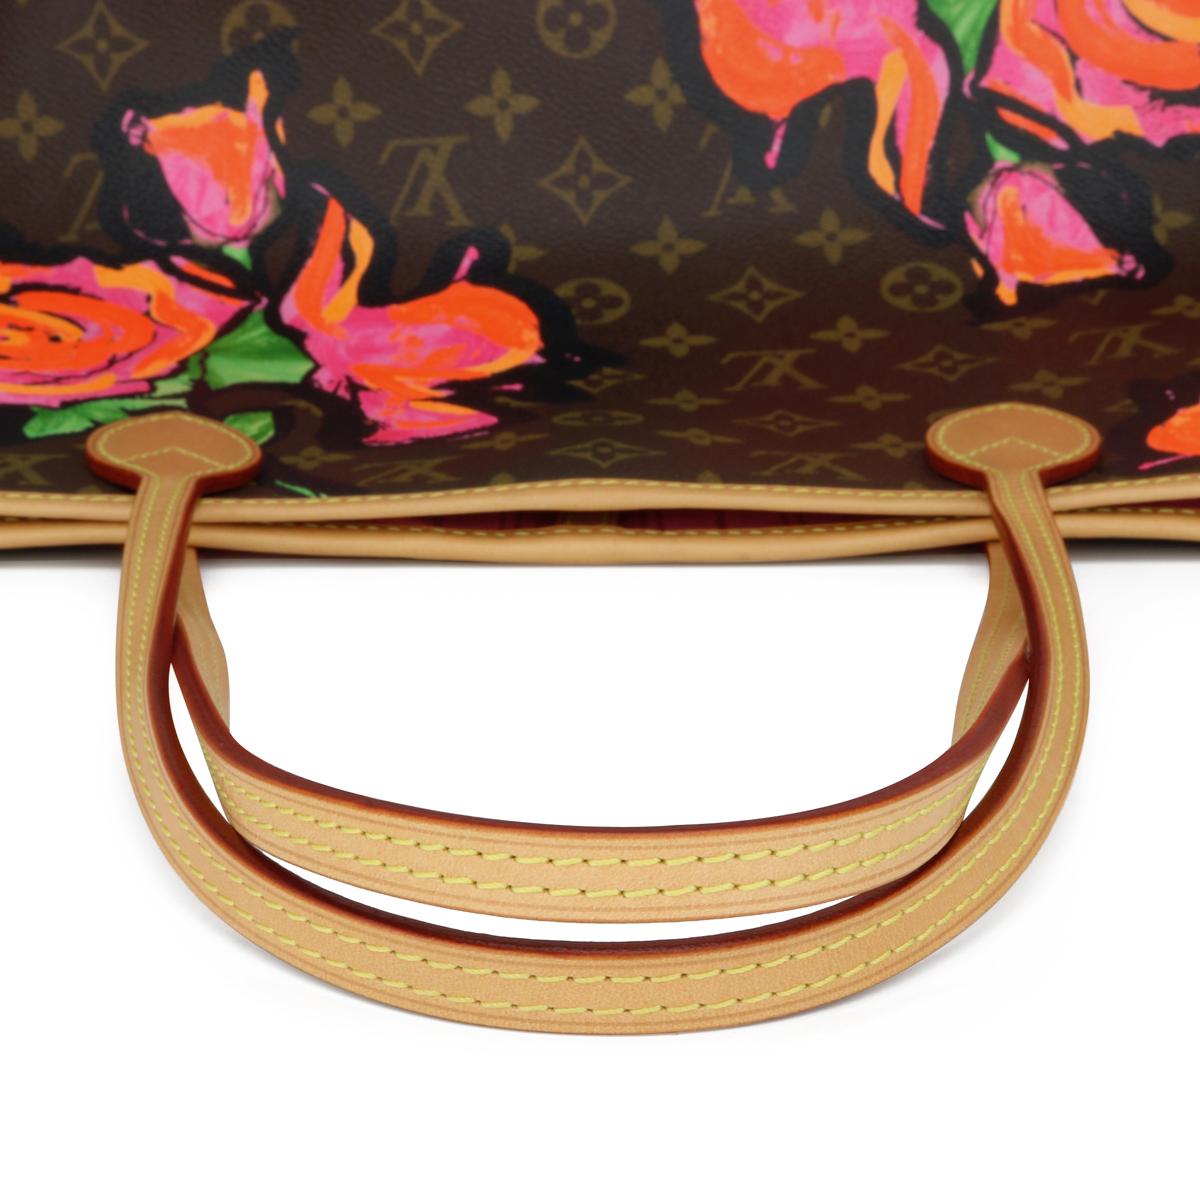 Louis Vuitton Neverfull MM Bag in Monogram Roses 2009 Limited Edition For Sale 9